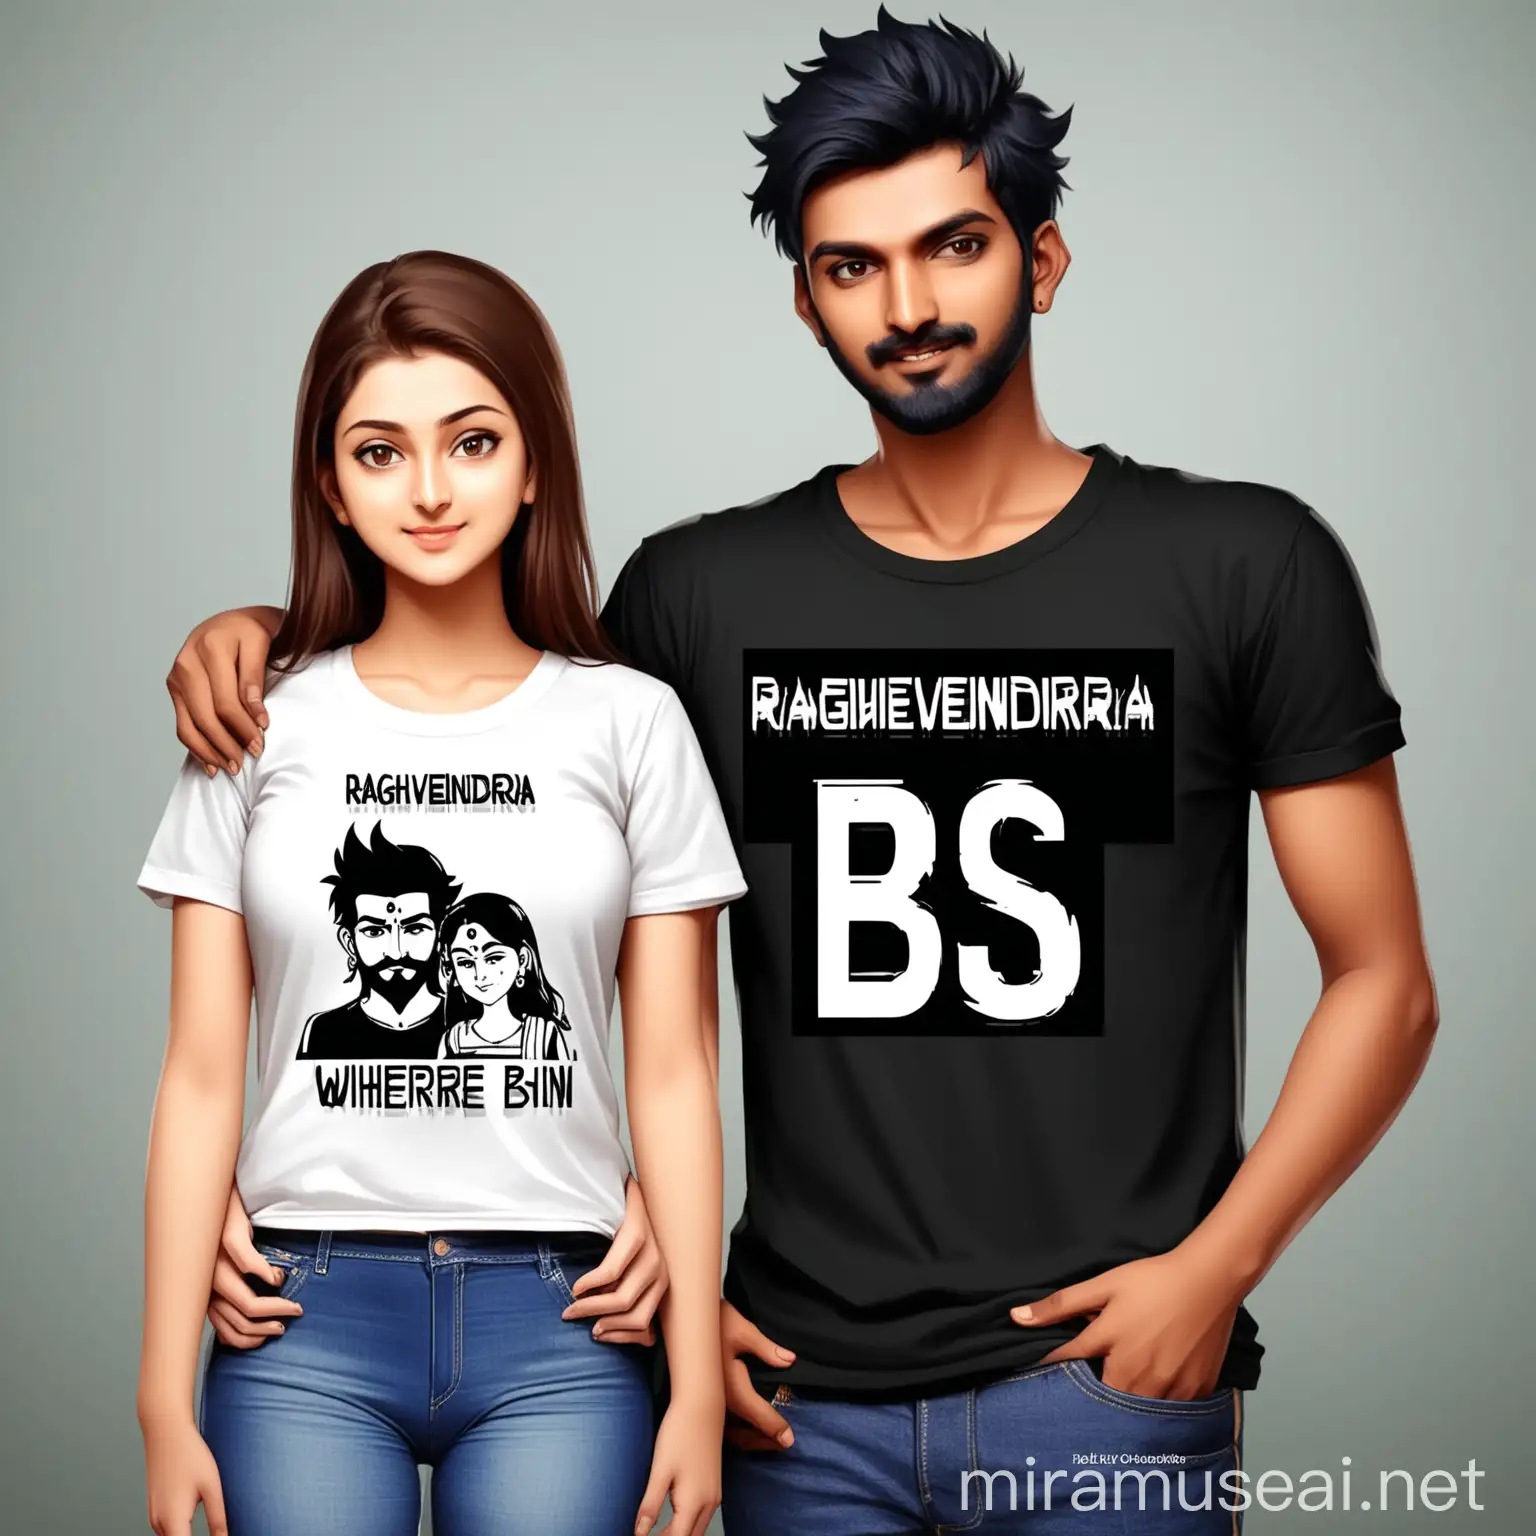 Raghavendra and BS Girl Stylish Youth Duo in TShirt Fashion